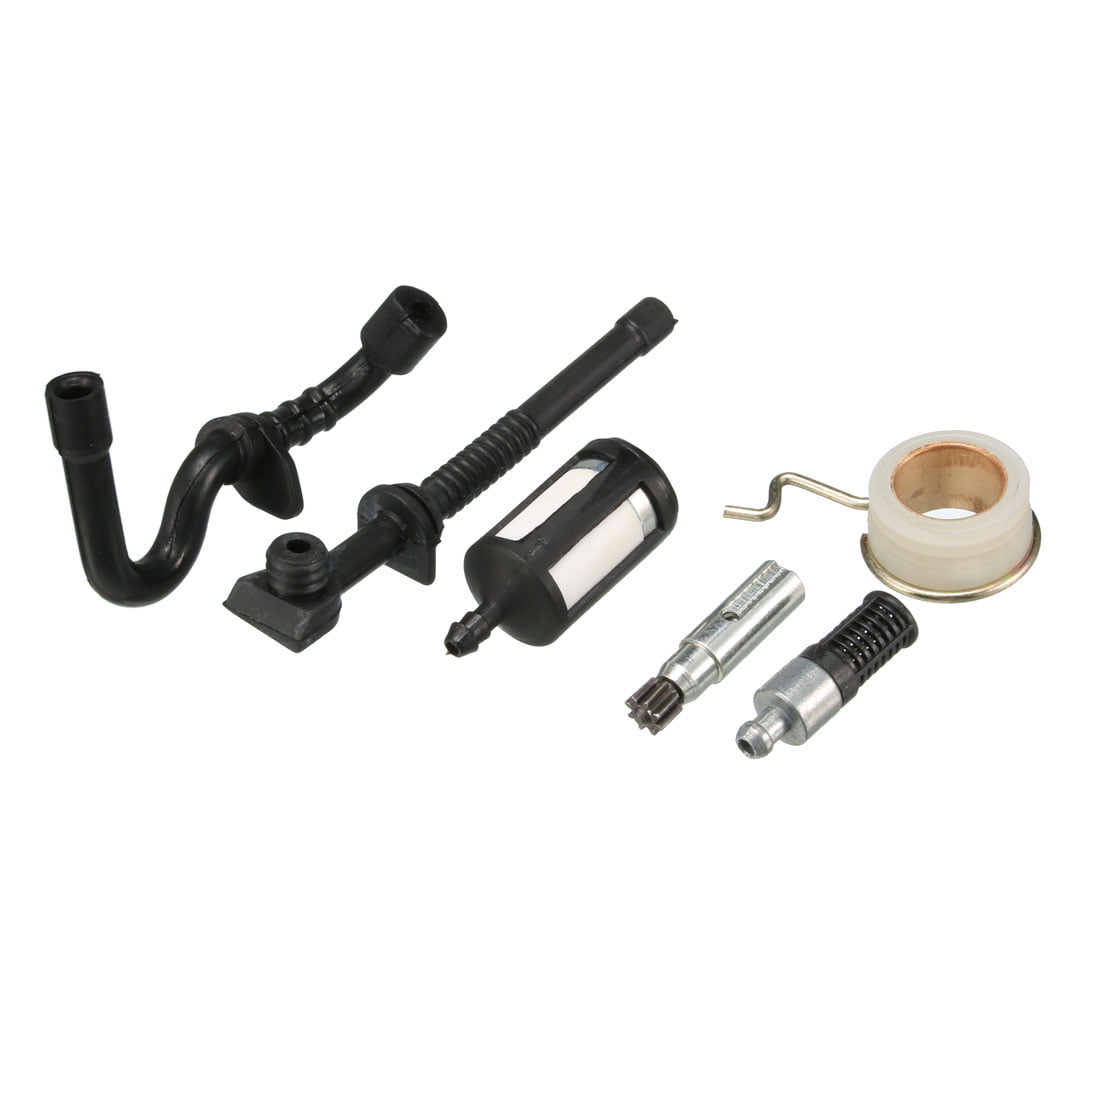 Details about   Oil Pump Worm Gear Hose Air Filter Kit for Stihl 017 018 MS170 MS180 Chainsaw 